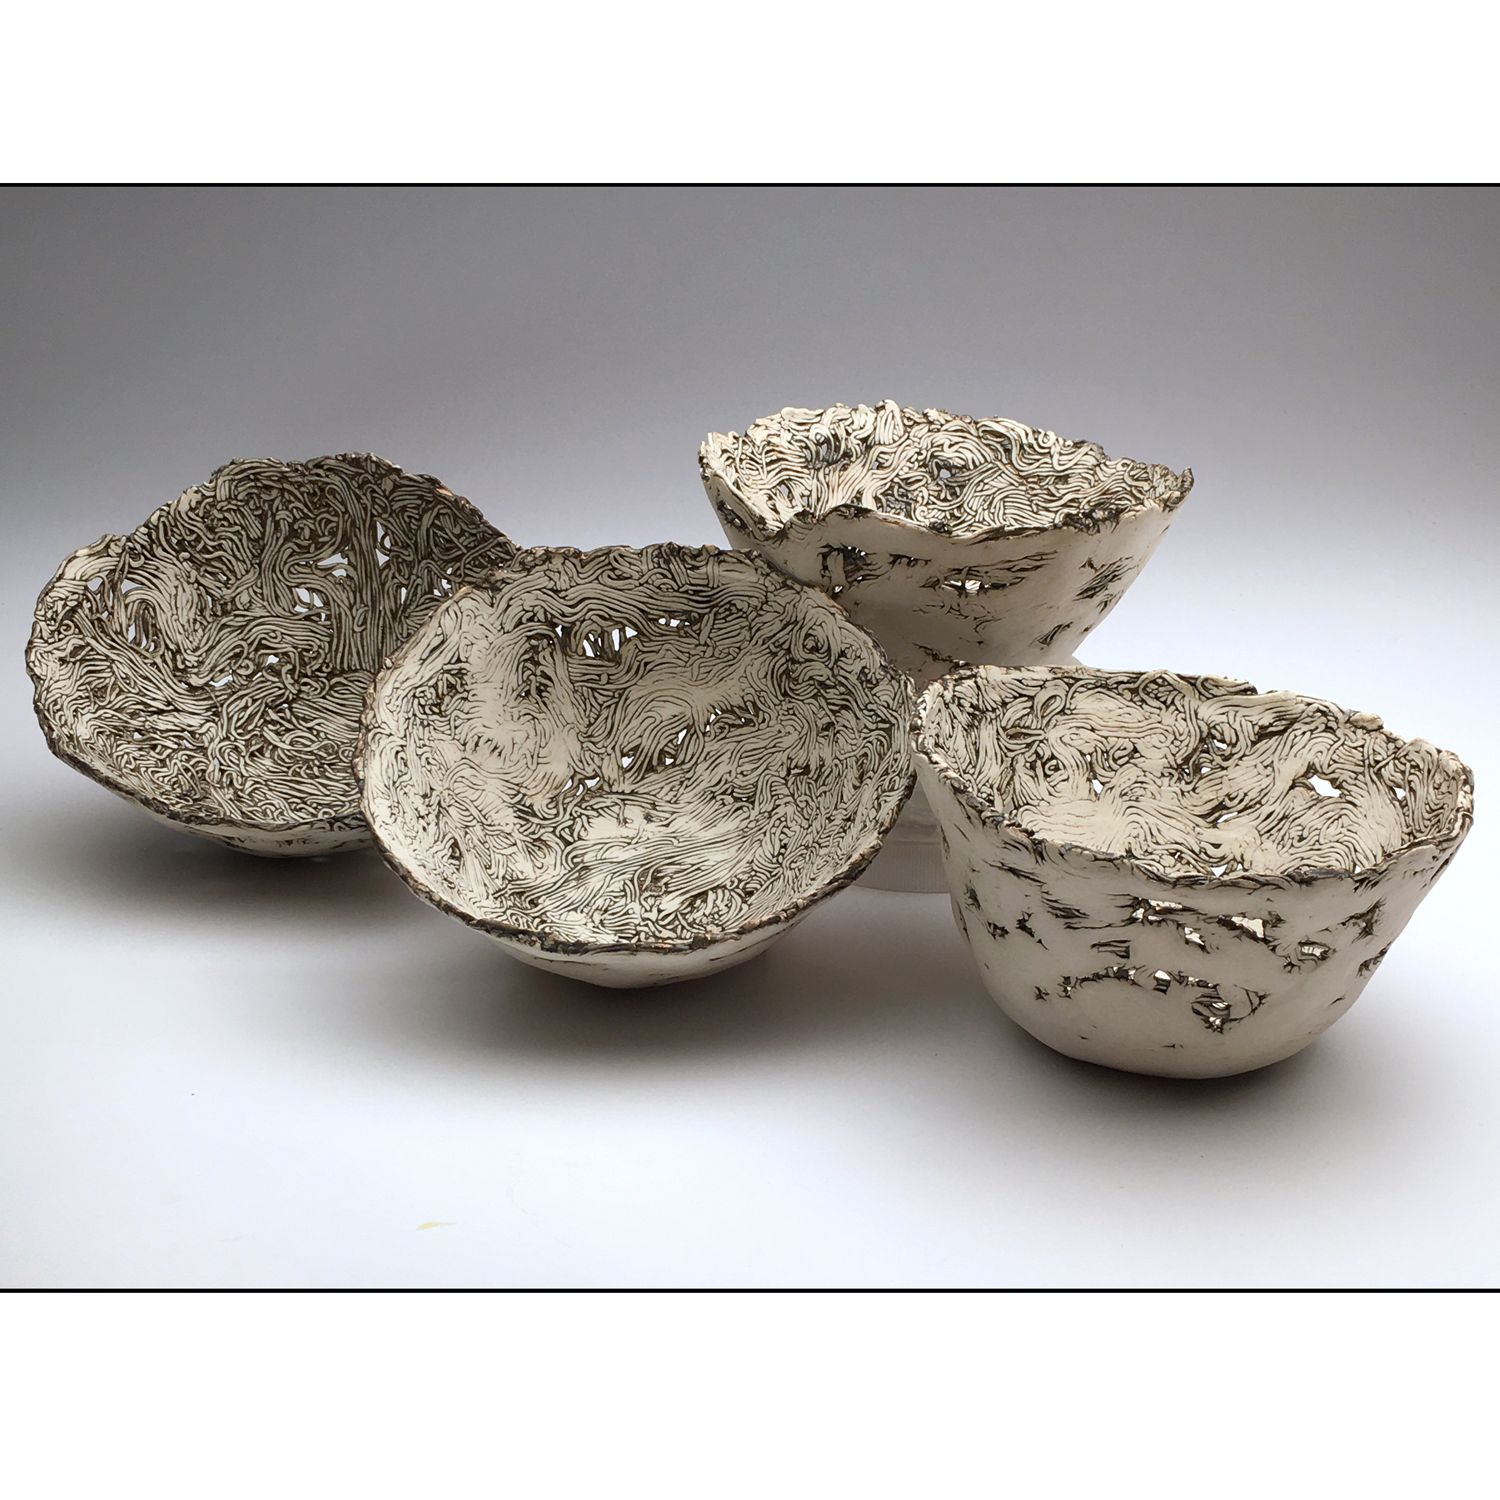 Audrey Mah: Small Porcelain Bowl Product Image 1 of 1